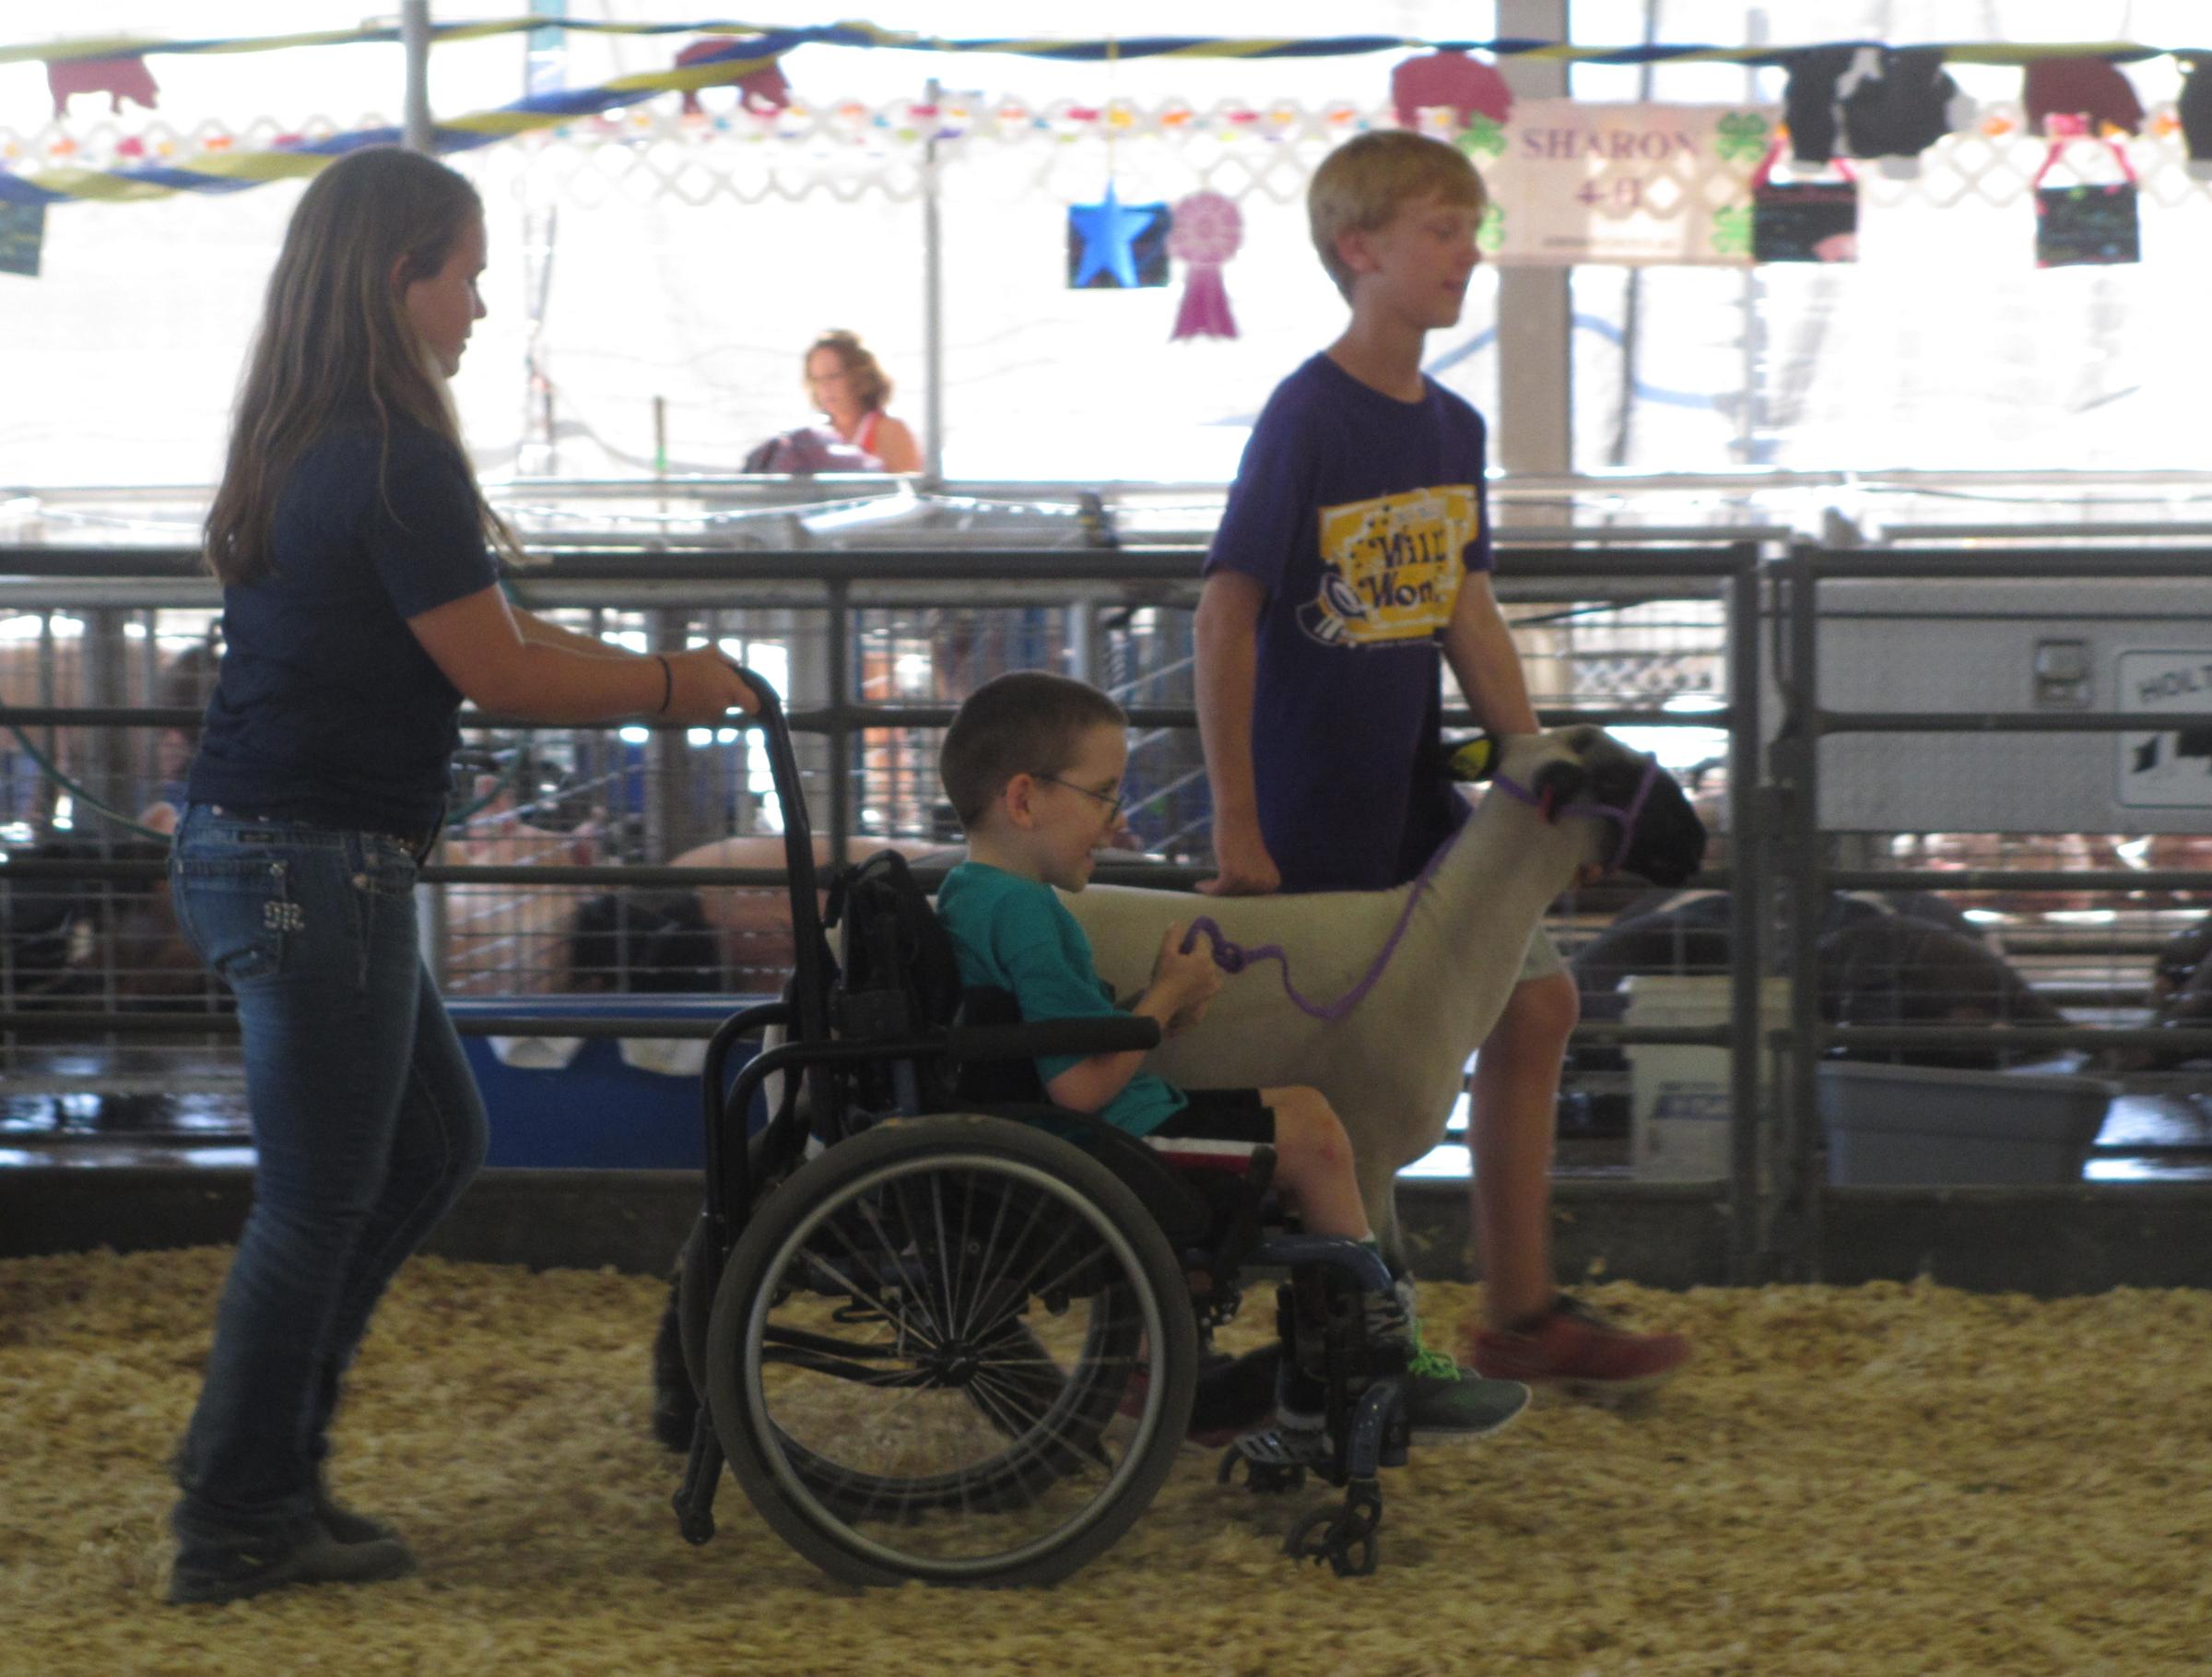 4 Unexpected Things At This Year's Johnson County Fair KCUR